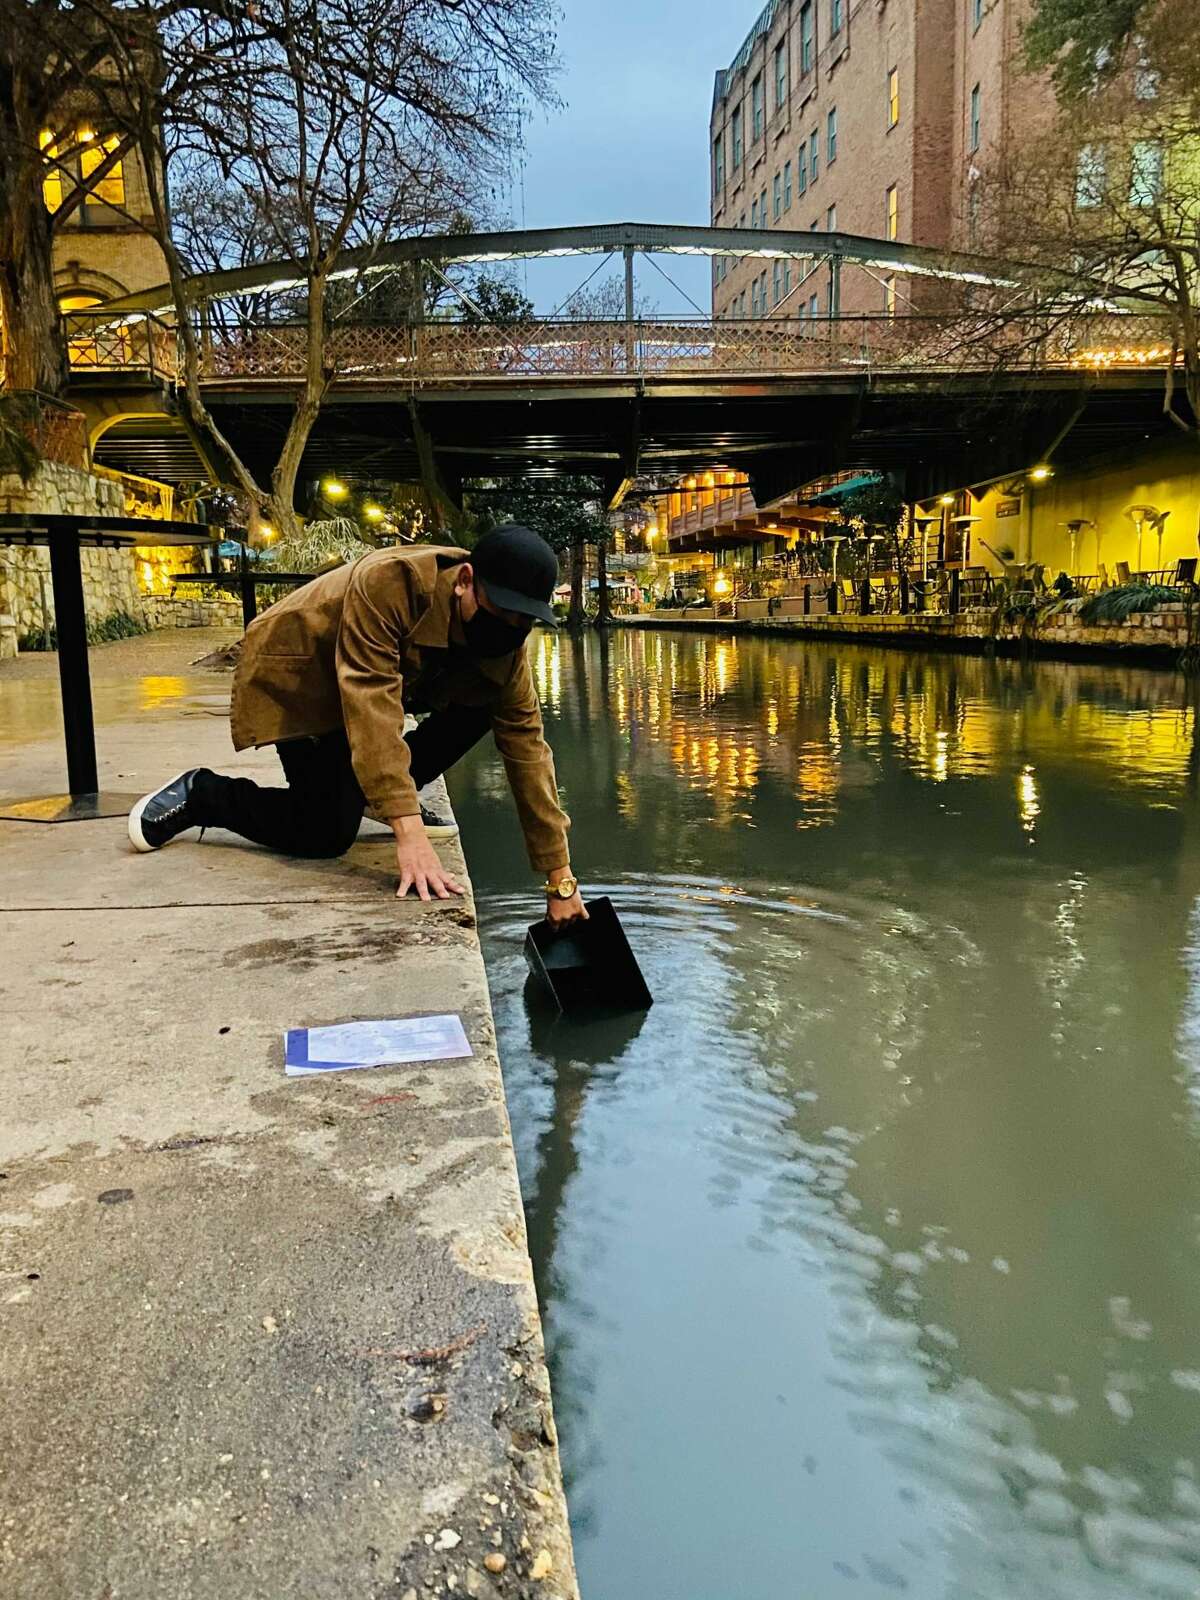 Downtown guests resorted to collecting San Antonio River water amid the utility issues plaguing Texas in the wake of winter weather.